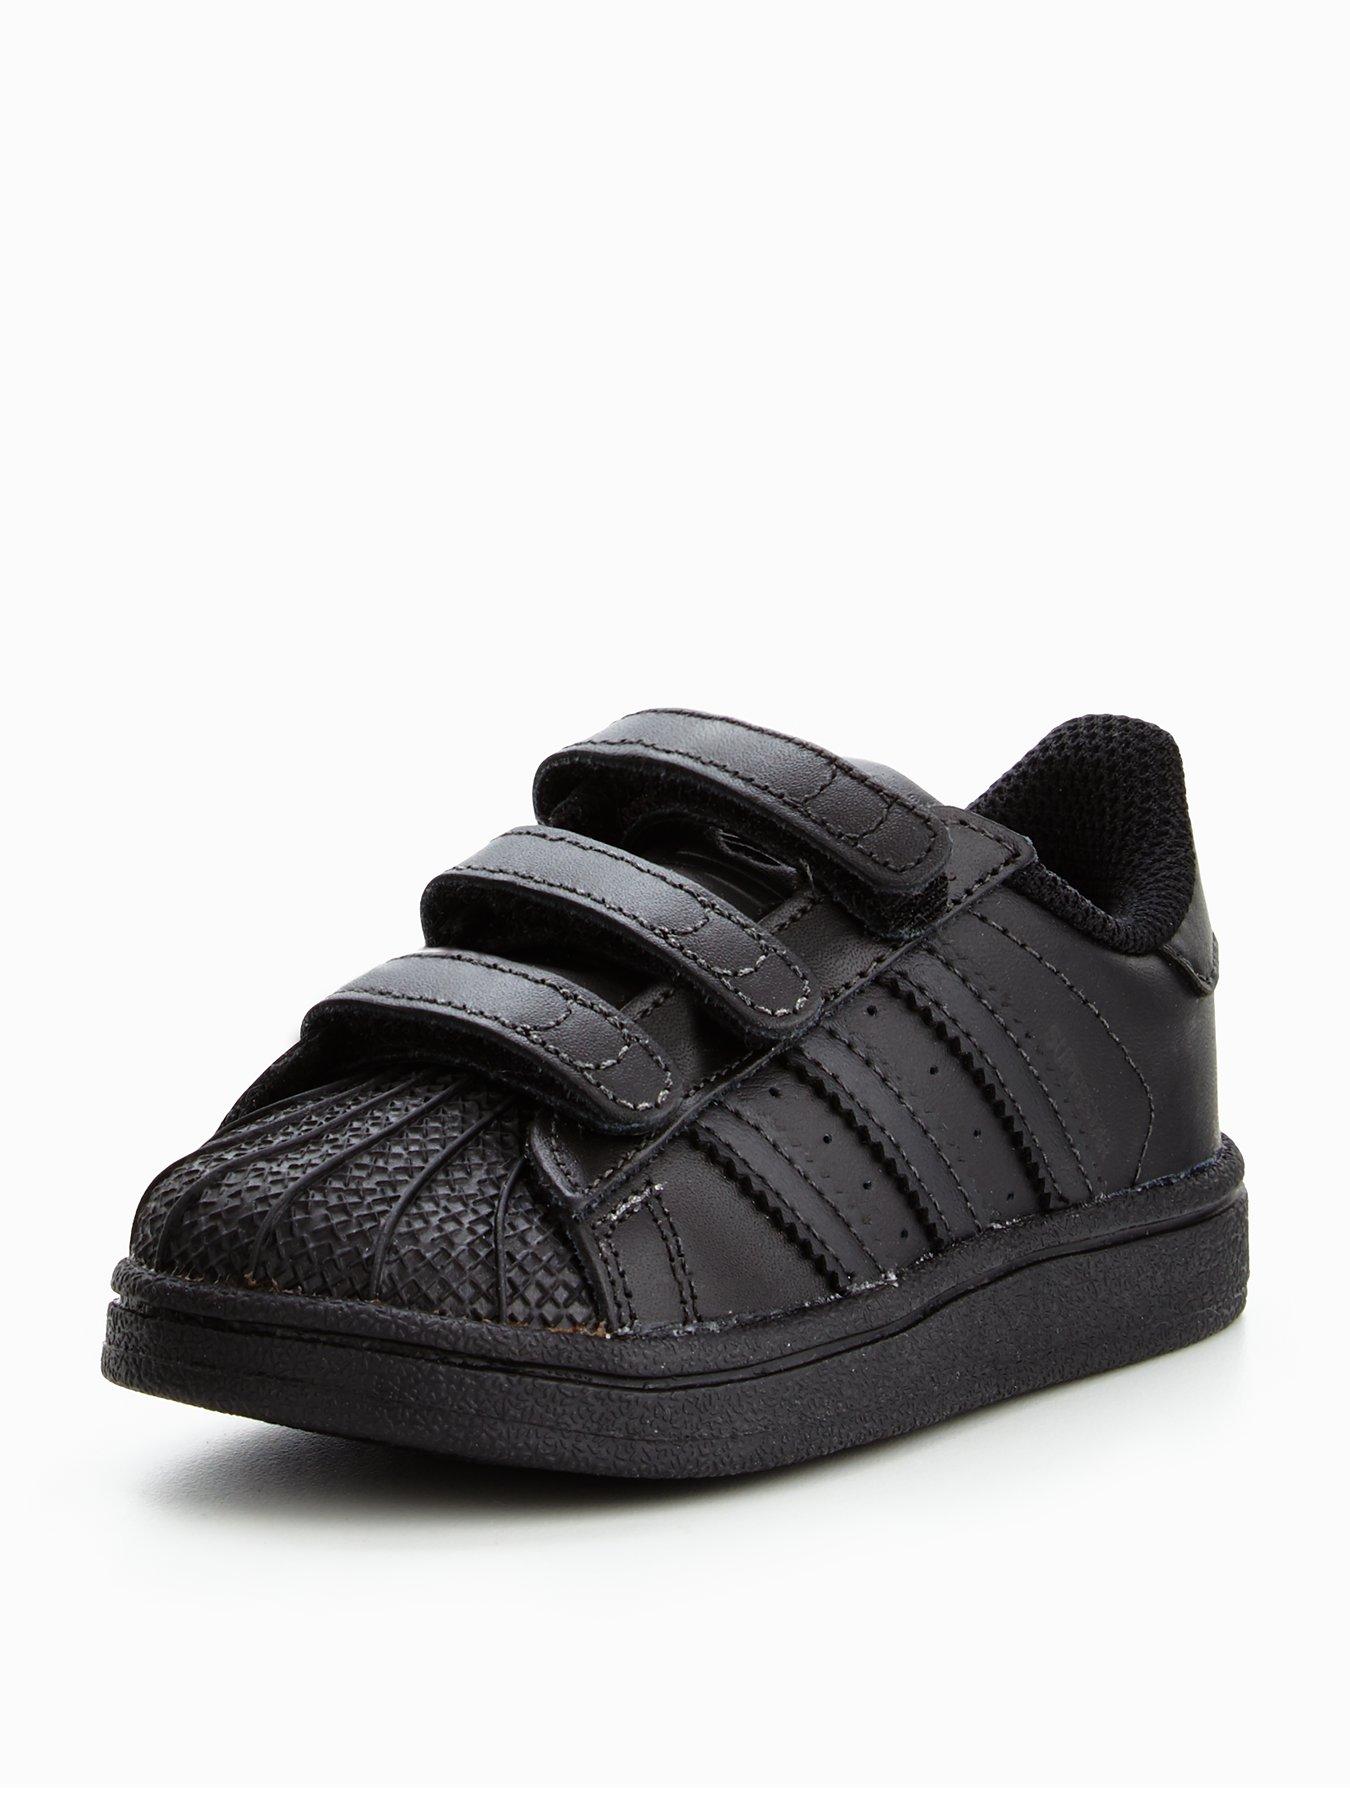 adidas superstar infant trainers